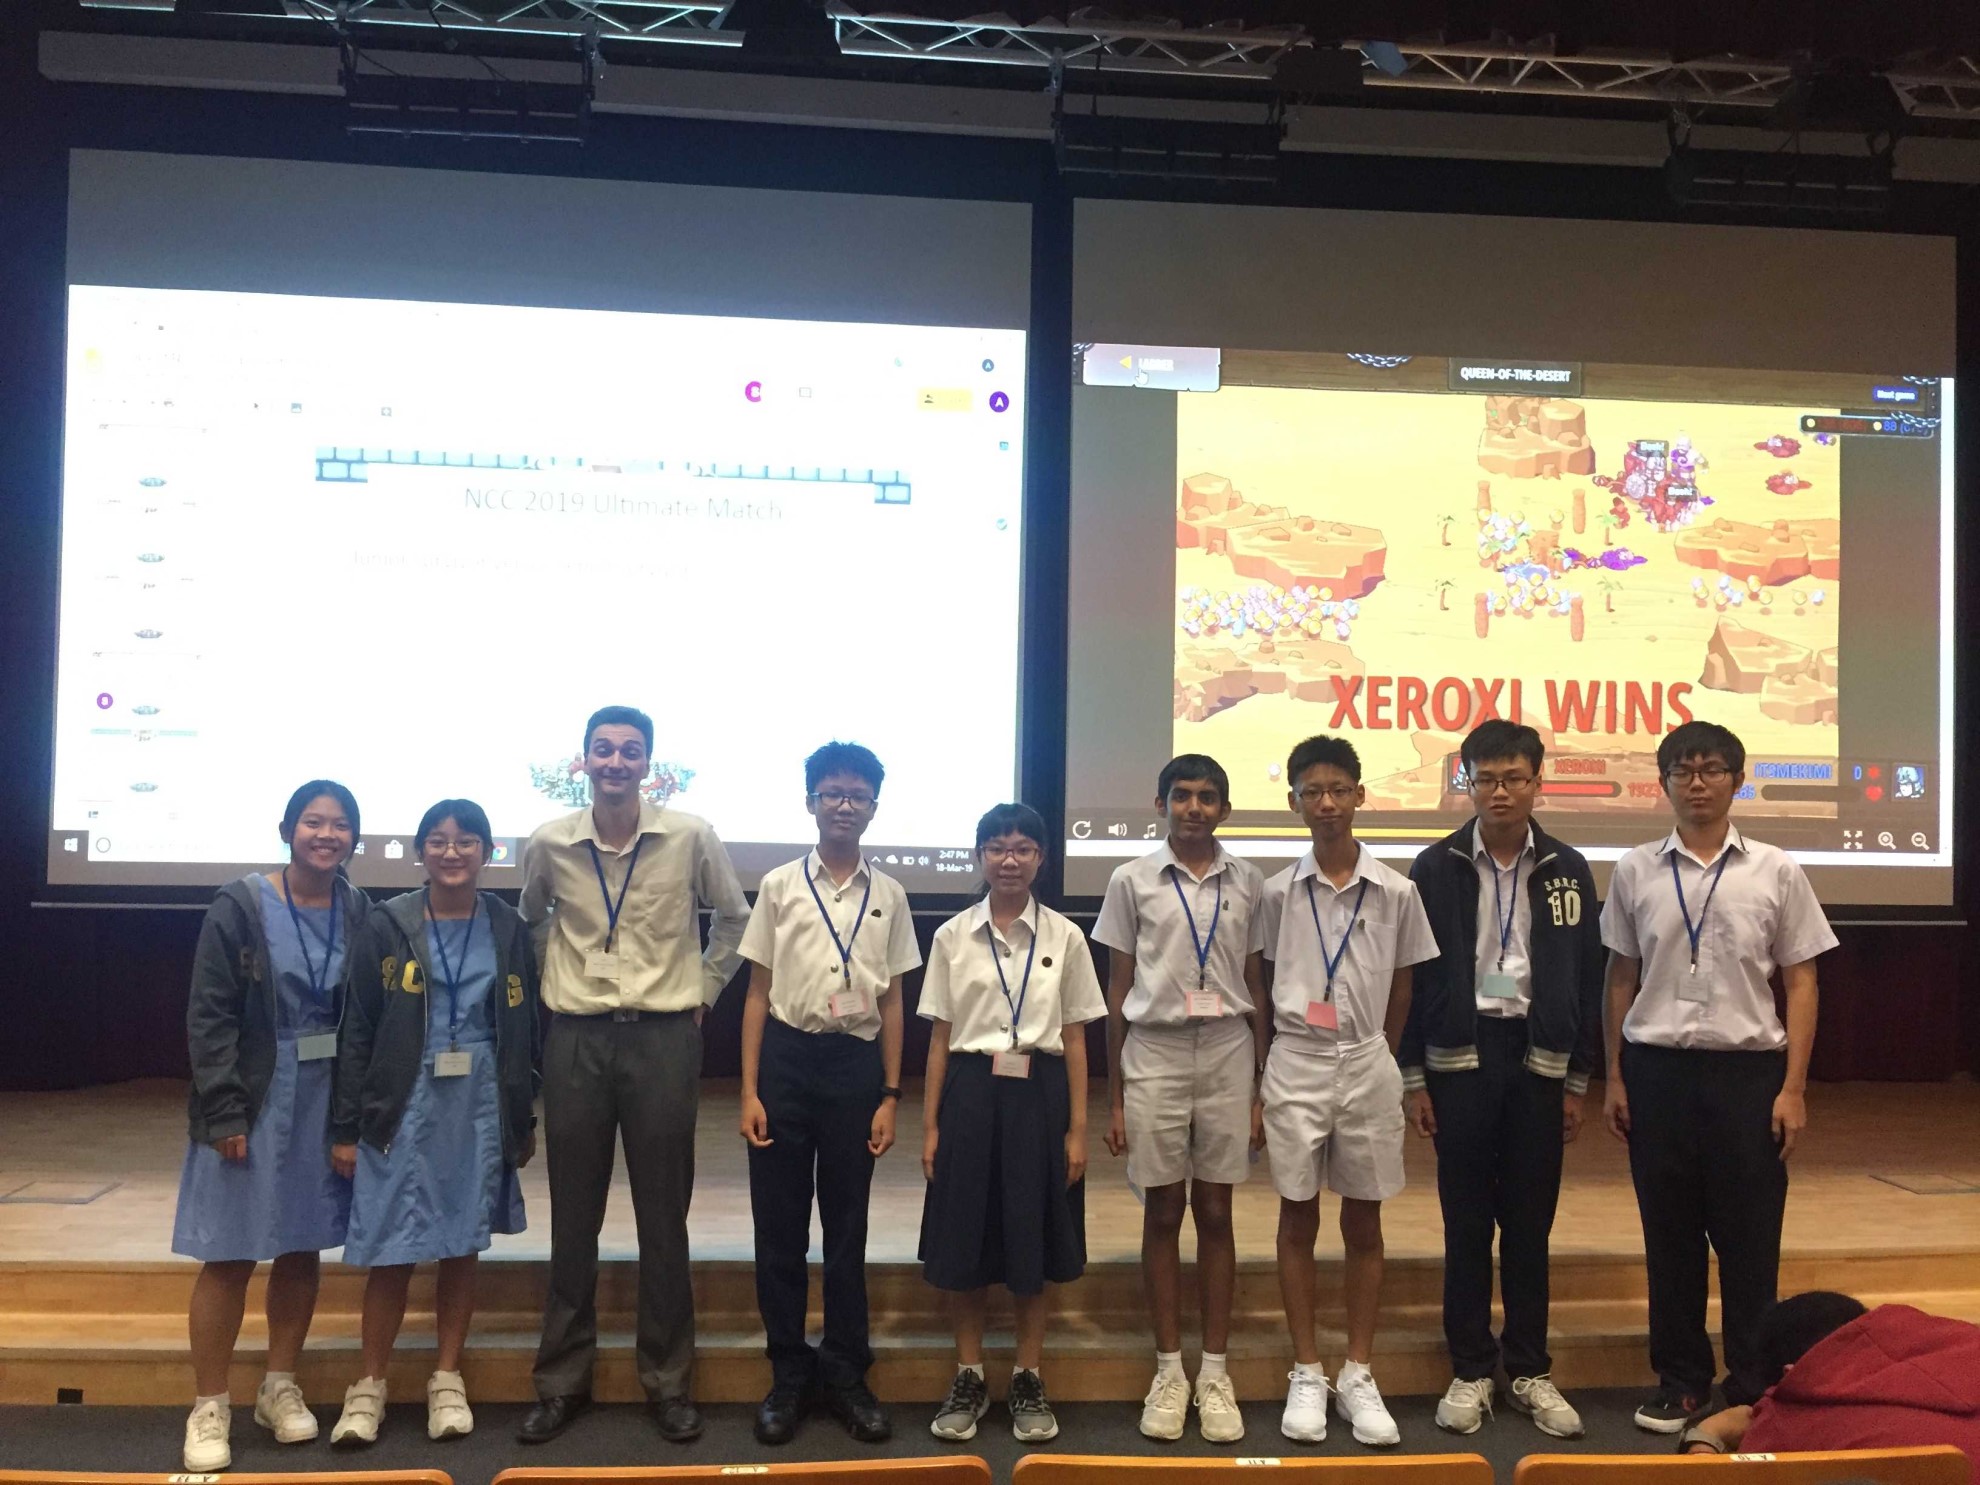 From left: Singapore Chinese Girls' School (Senior Category Champion), Kevin from ALSET, Dunman High School (Junior Category Champion), St. Joseph's Institution (Junior Category Runner-up) & Jurong Pioneer Junior College (Senior Category Runner-up)